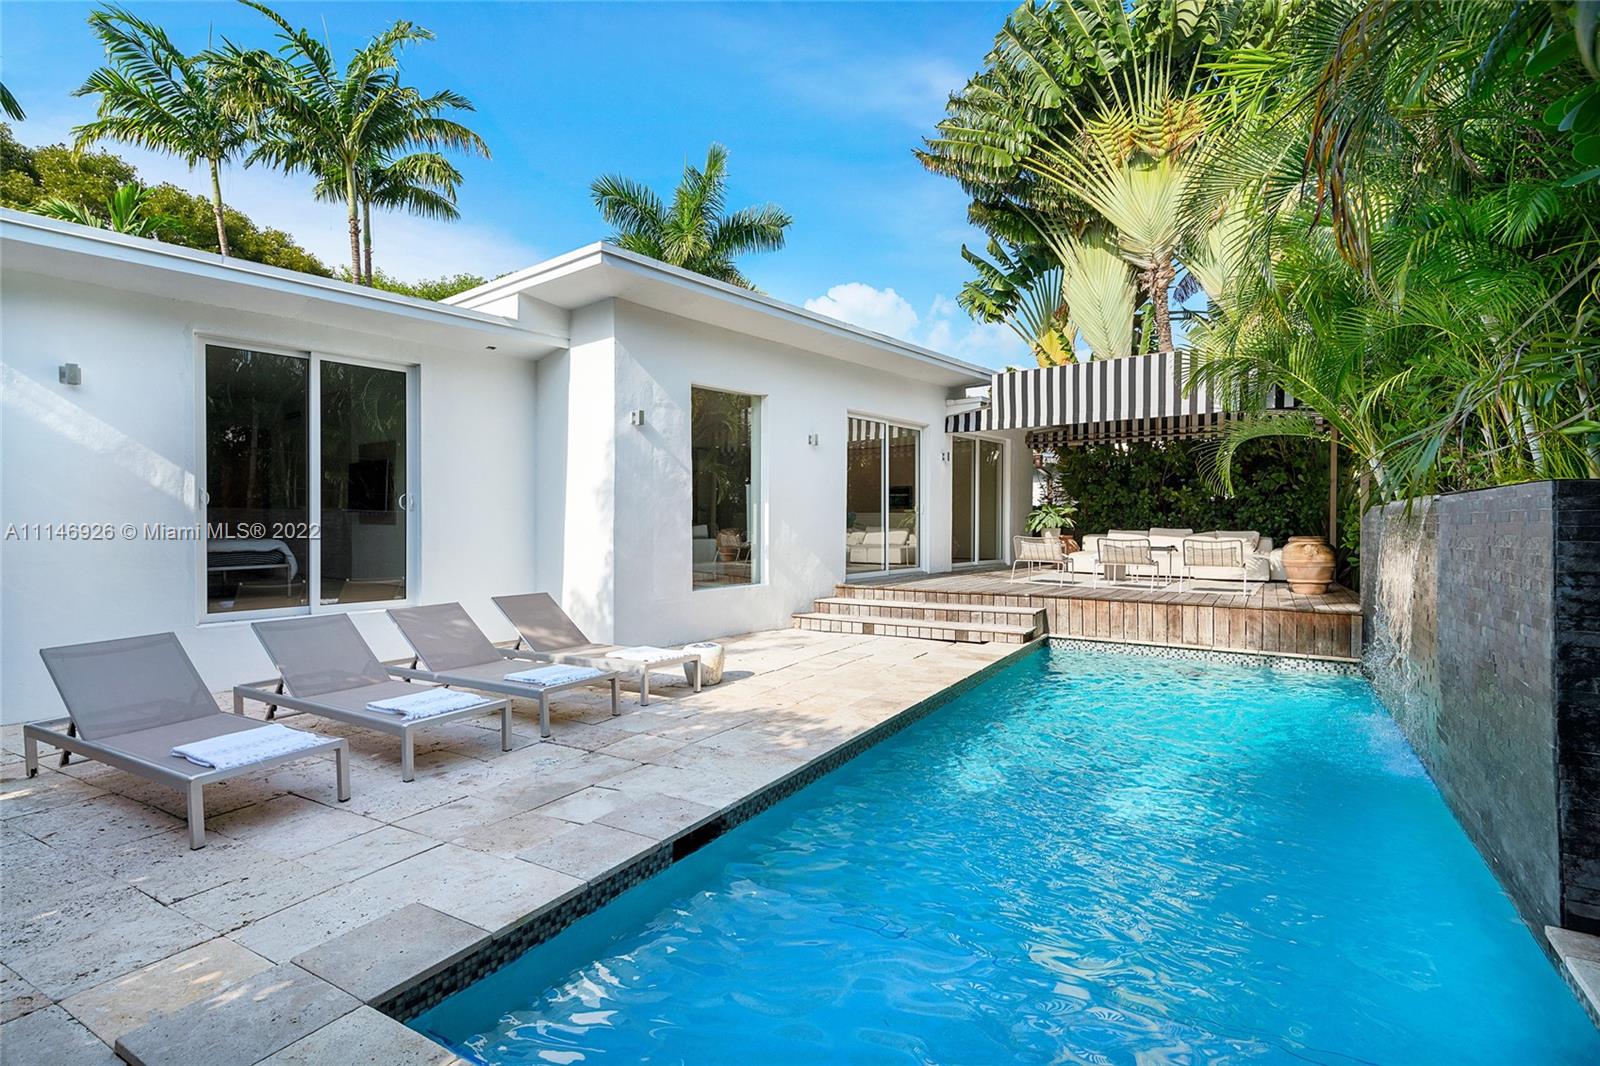 Enjoy modern finishes in this renovated 3BR/3BA Villa in the heart of Miami Beach. Features include: Italian oak floor or Marmorino, cooking island kitchen with stainless steel appliances, open living/dining area, principal suite with direct access to the outdoors, home automation lighting system, large backyard w/ heated saltwater pool with cascade waterfall, wooden deck, outdoor dining area, lush high hedges for ultimate privacy. This villa offers the best of Italian design and manufacture. Every detail is tailor-made by Italian artisans with a meticulous choice of materials.